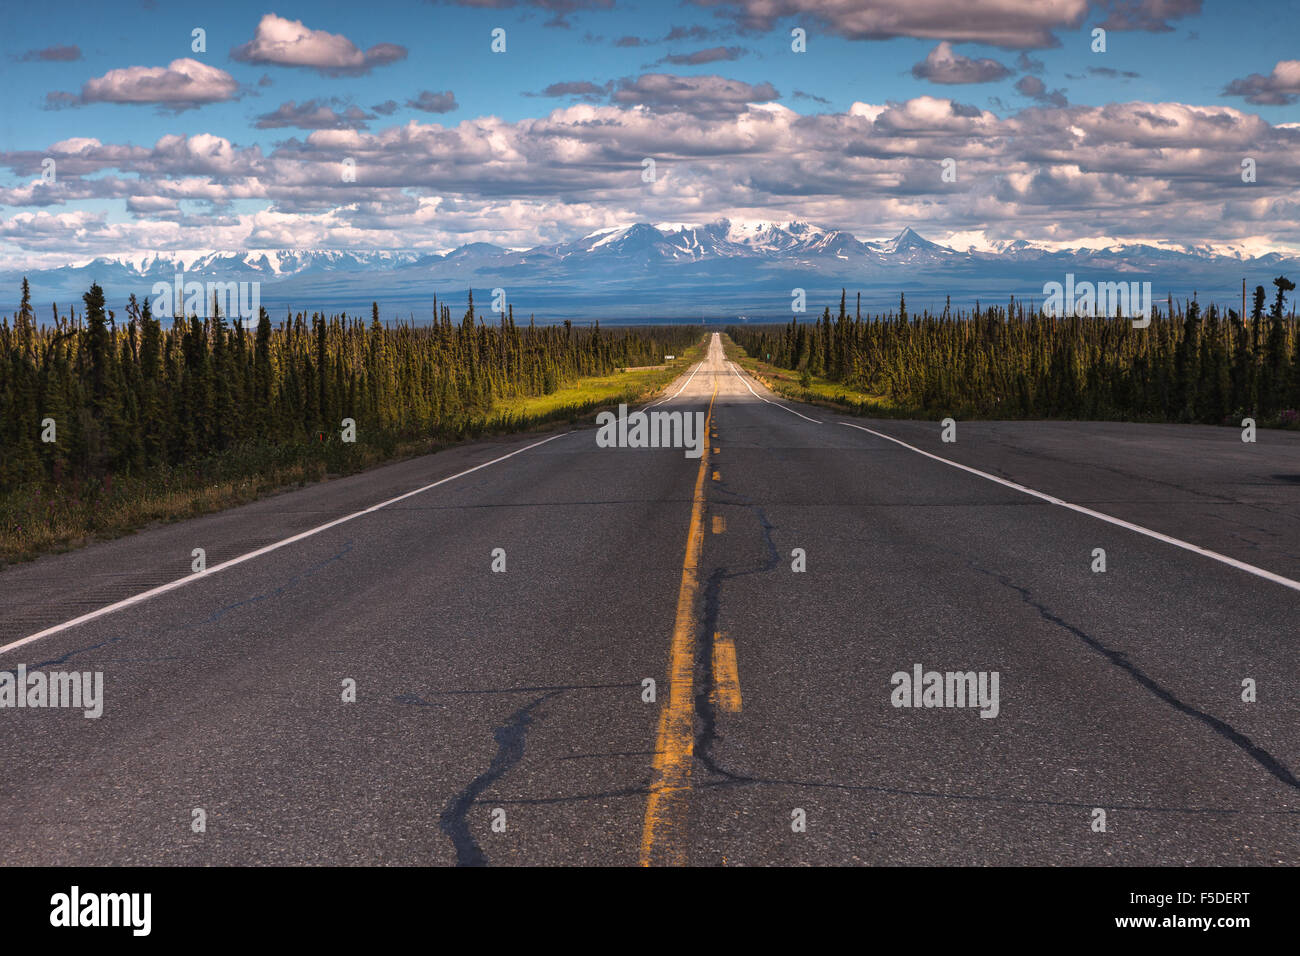 A view of Mount Drum from the Glennallen Highway, Alaska, USA. Stock Photo